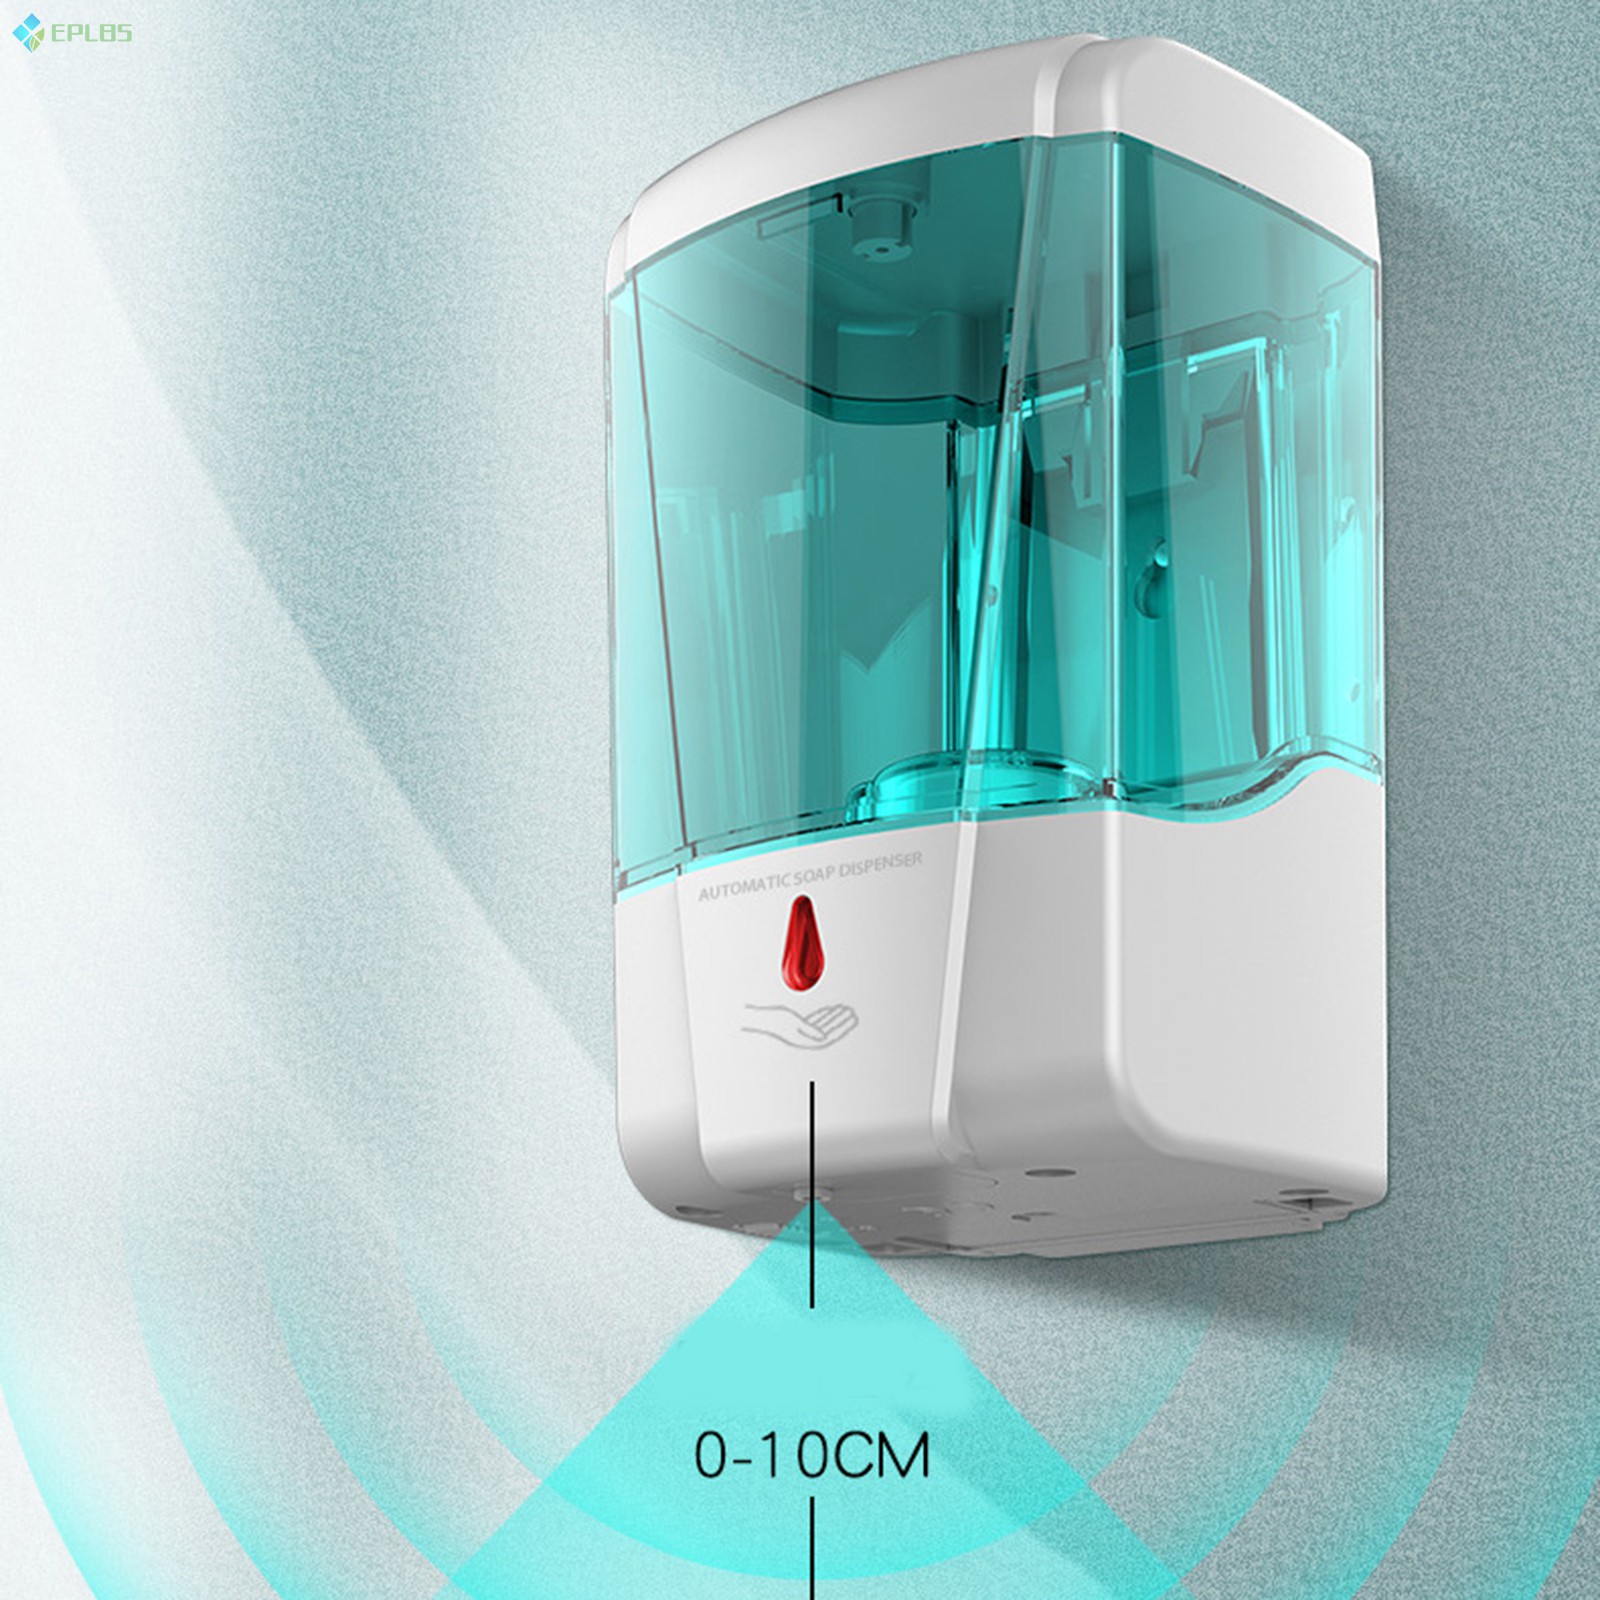 EPLBS 700ml Automatic Sensor Soap Dispenser Touchless Wall Mounted Liquid Soap Home Bathroom